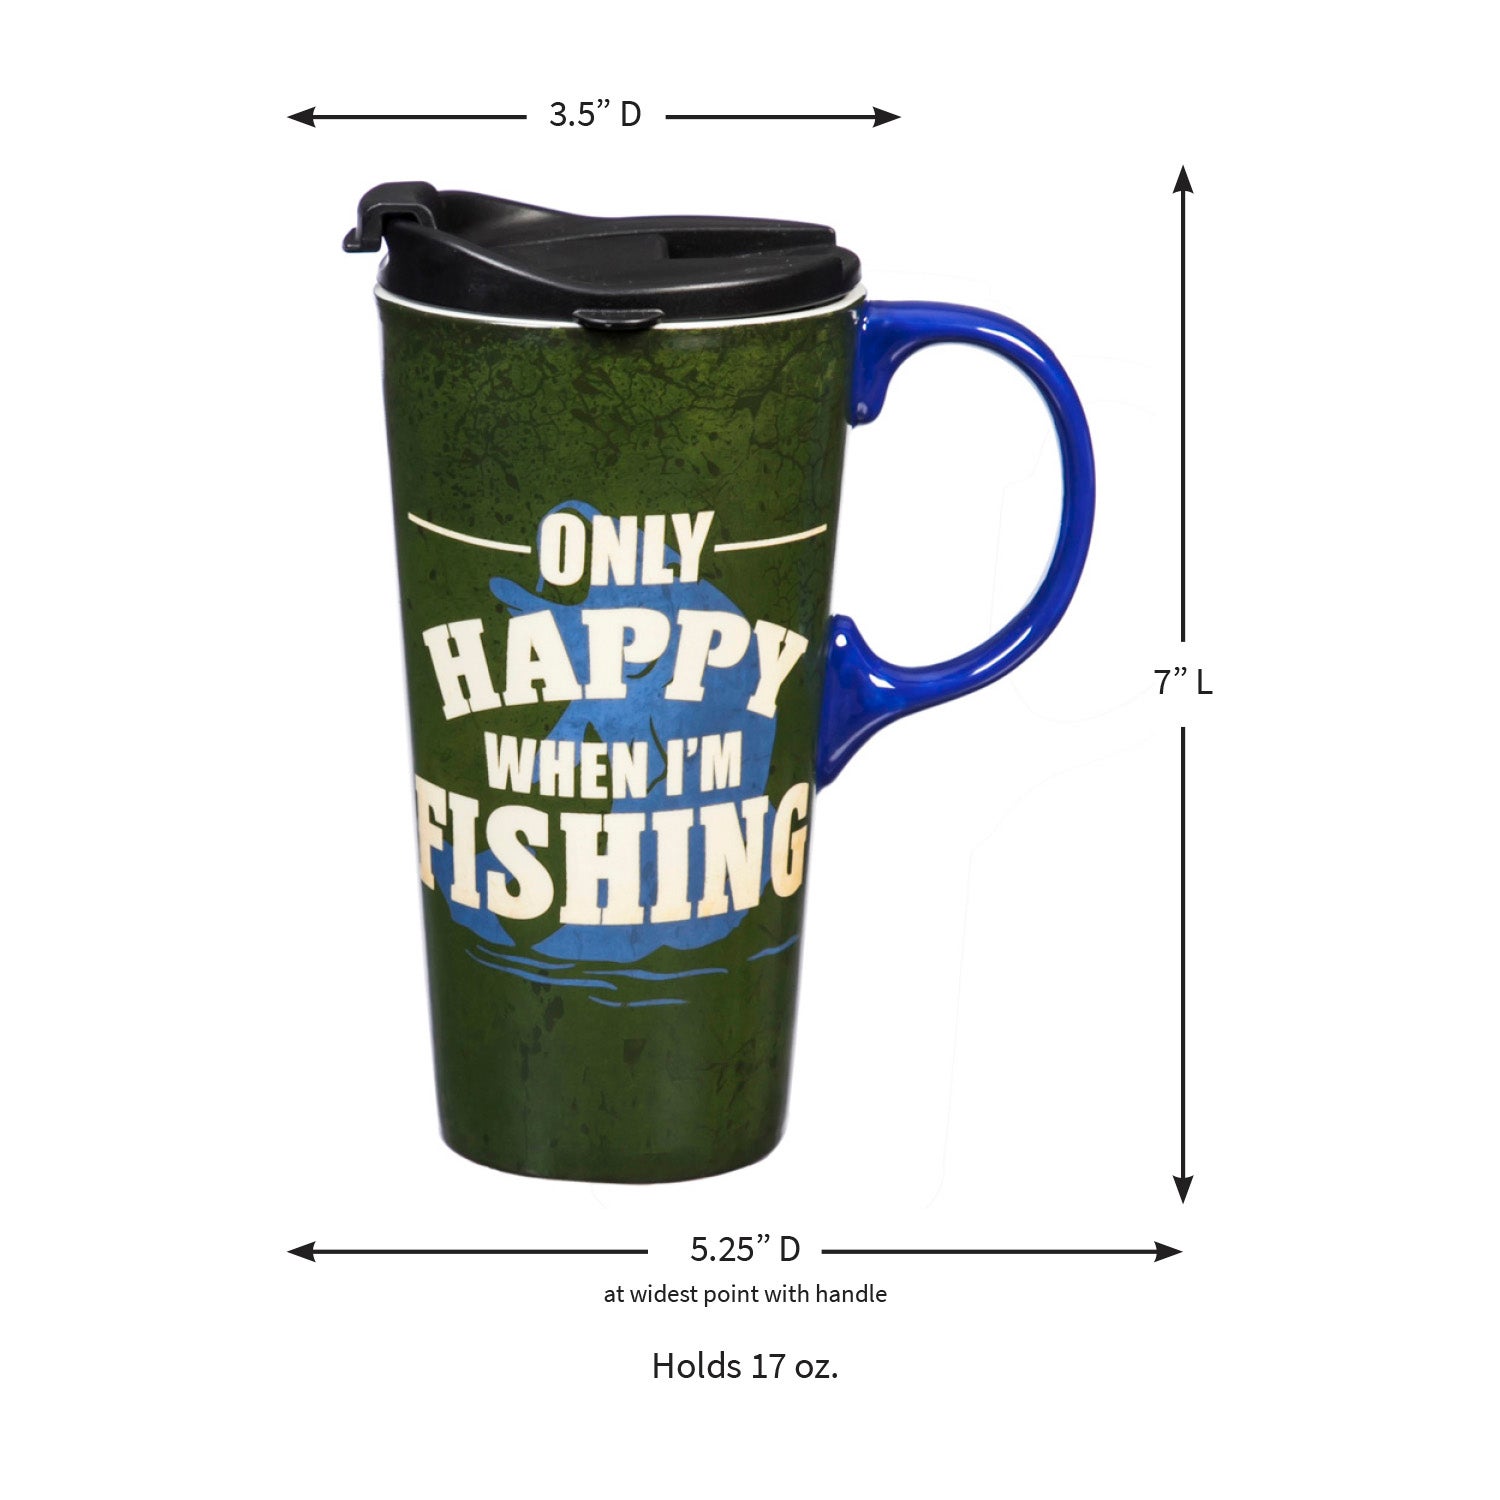 Only Happy When I'm Fishing 17 oz. Ceramic Travel Cup with box